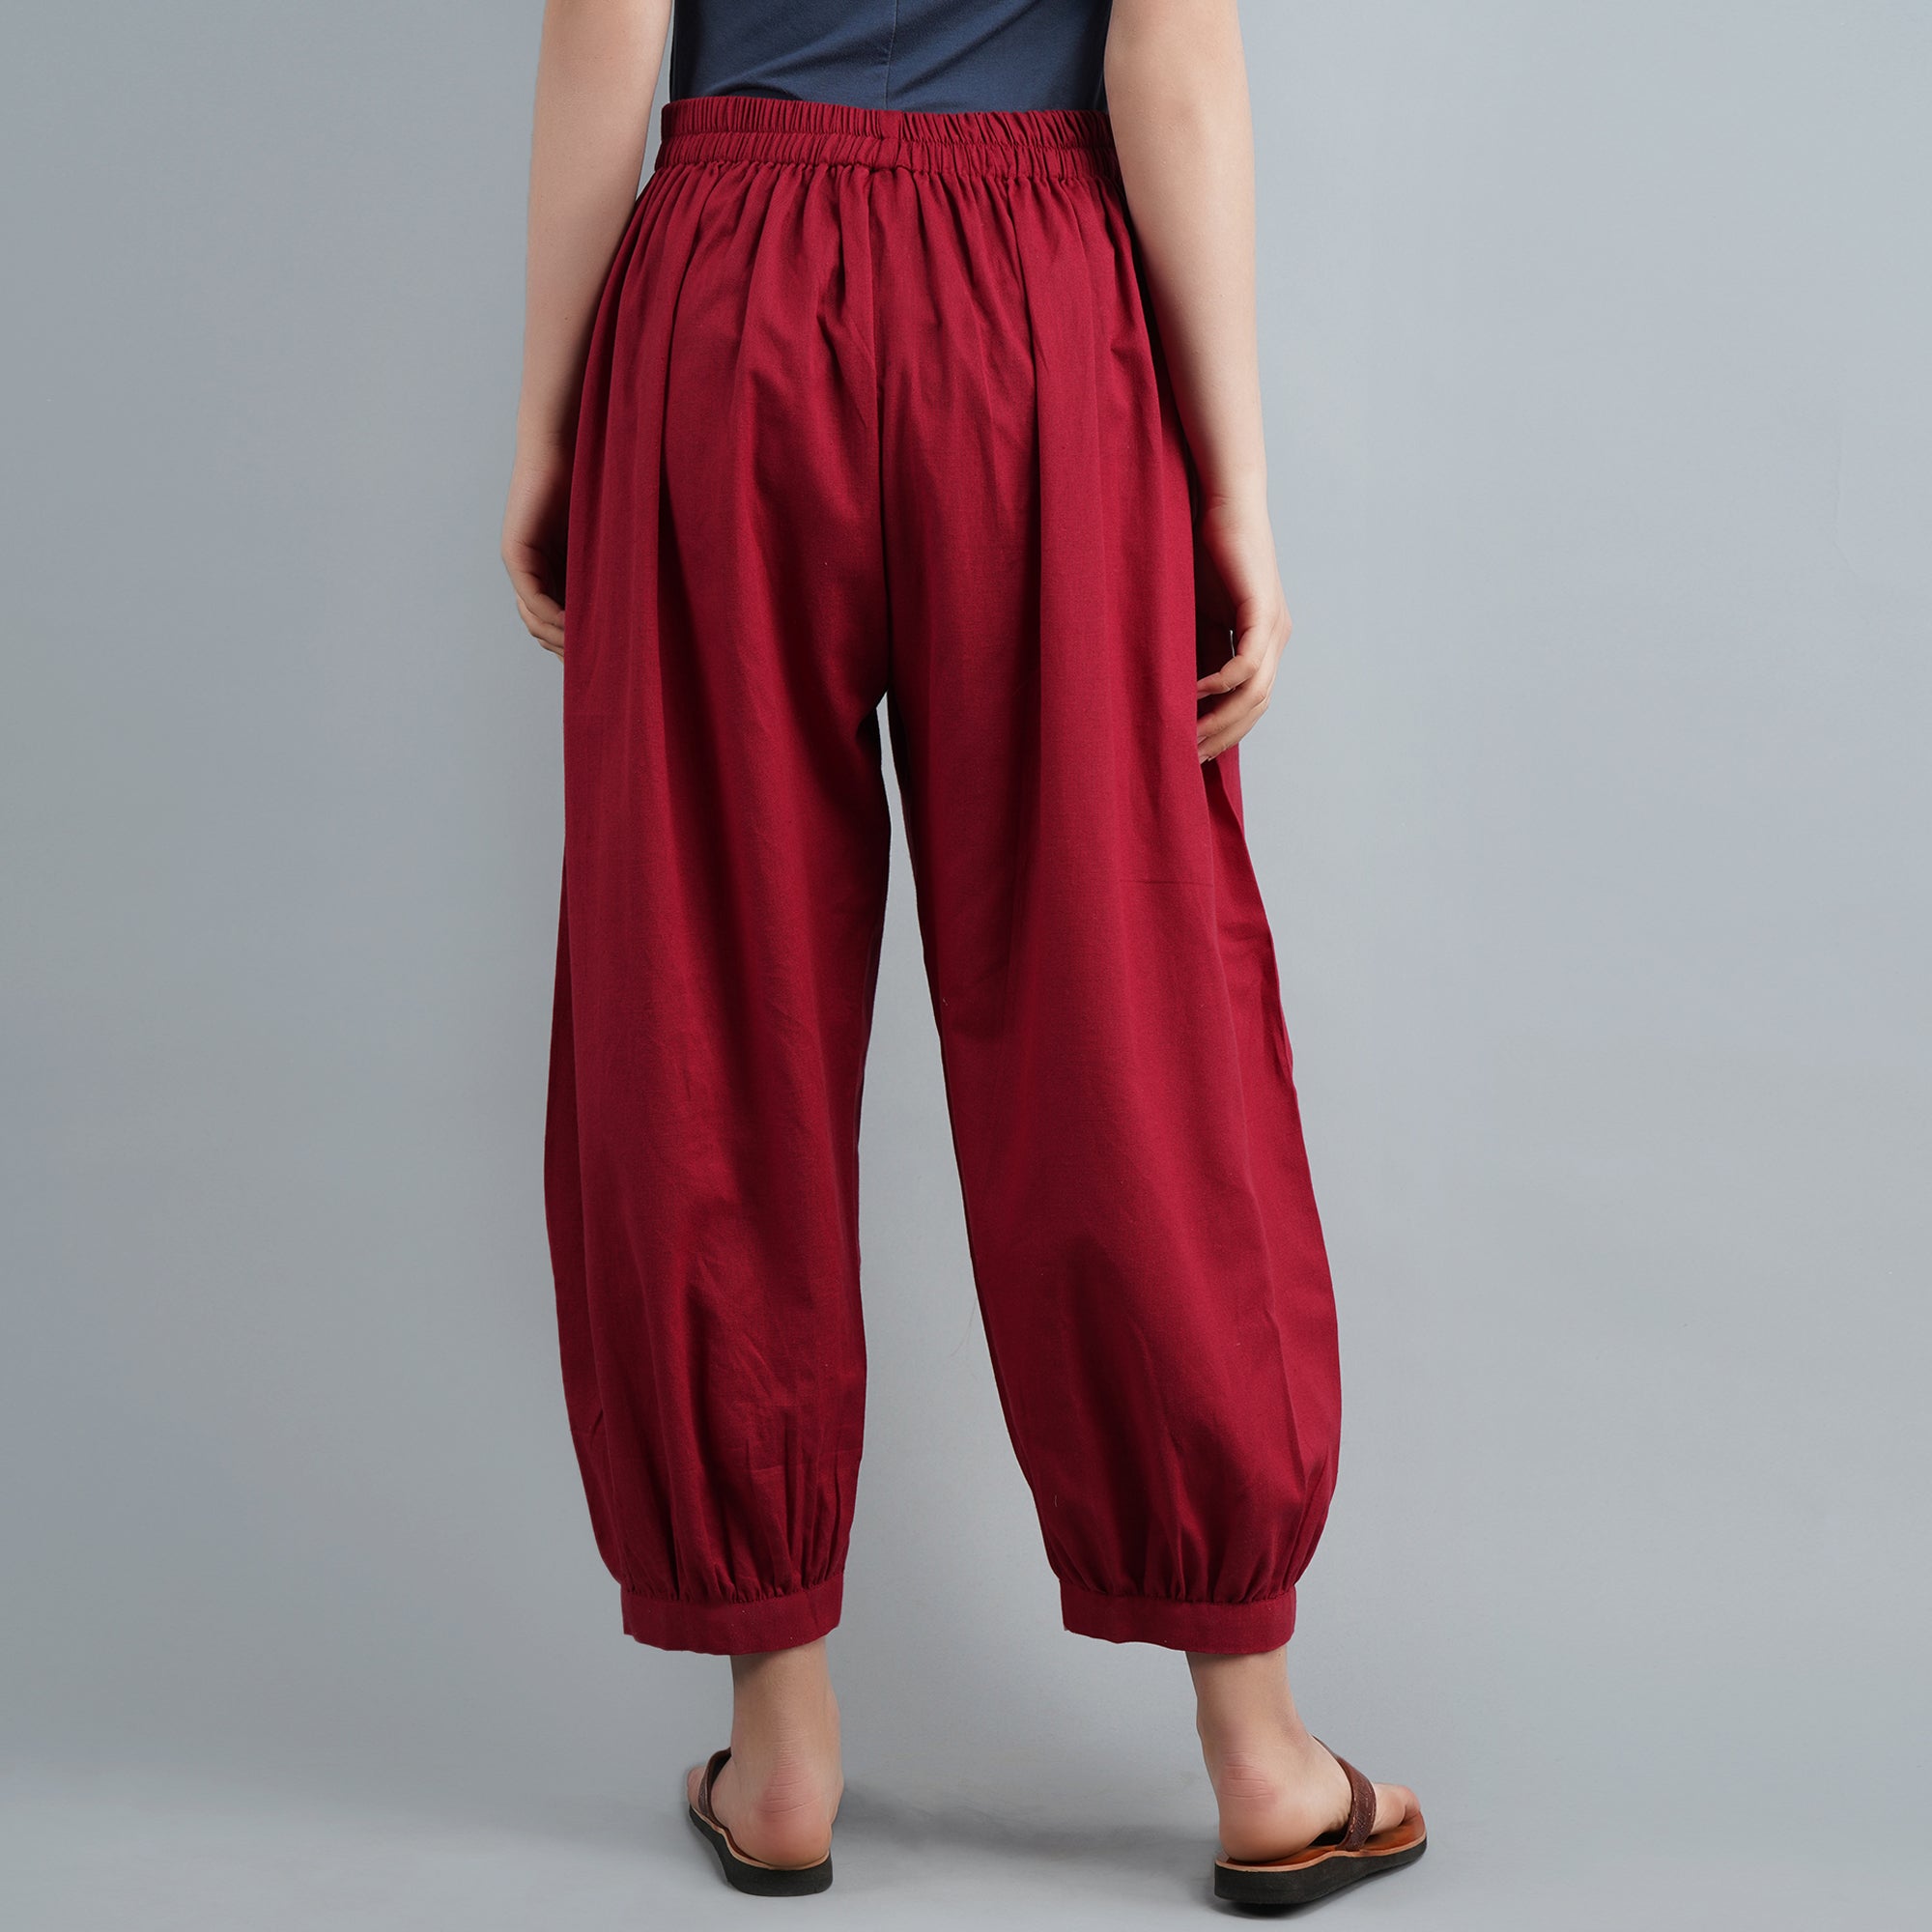 Casual Style Linen Blend Harem Trousers Long Dark Red Hippie Pants for  Woman in Dark Red One Size | Hippie pants, Pants for women, Harem trousers